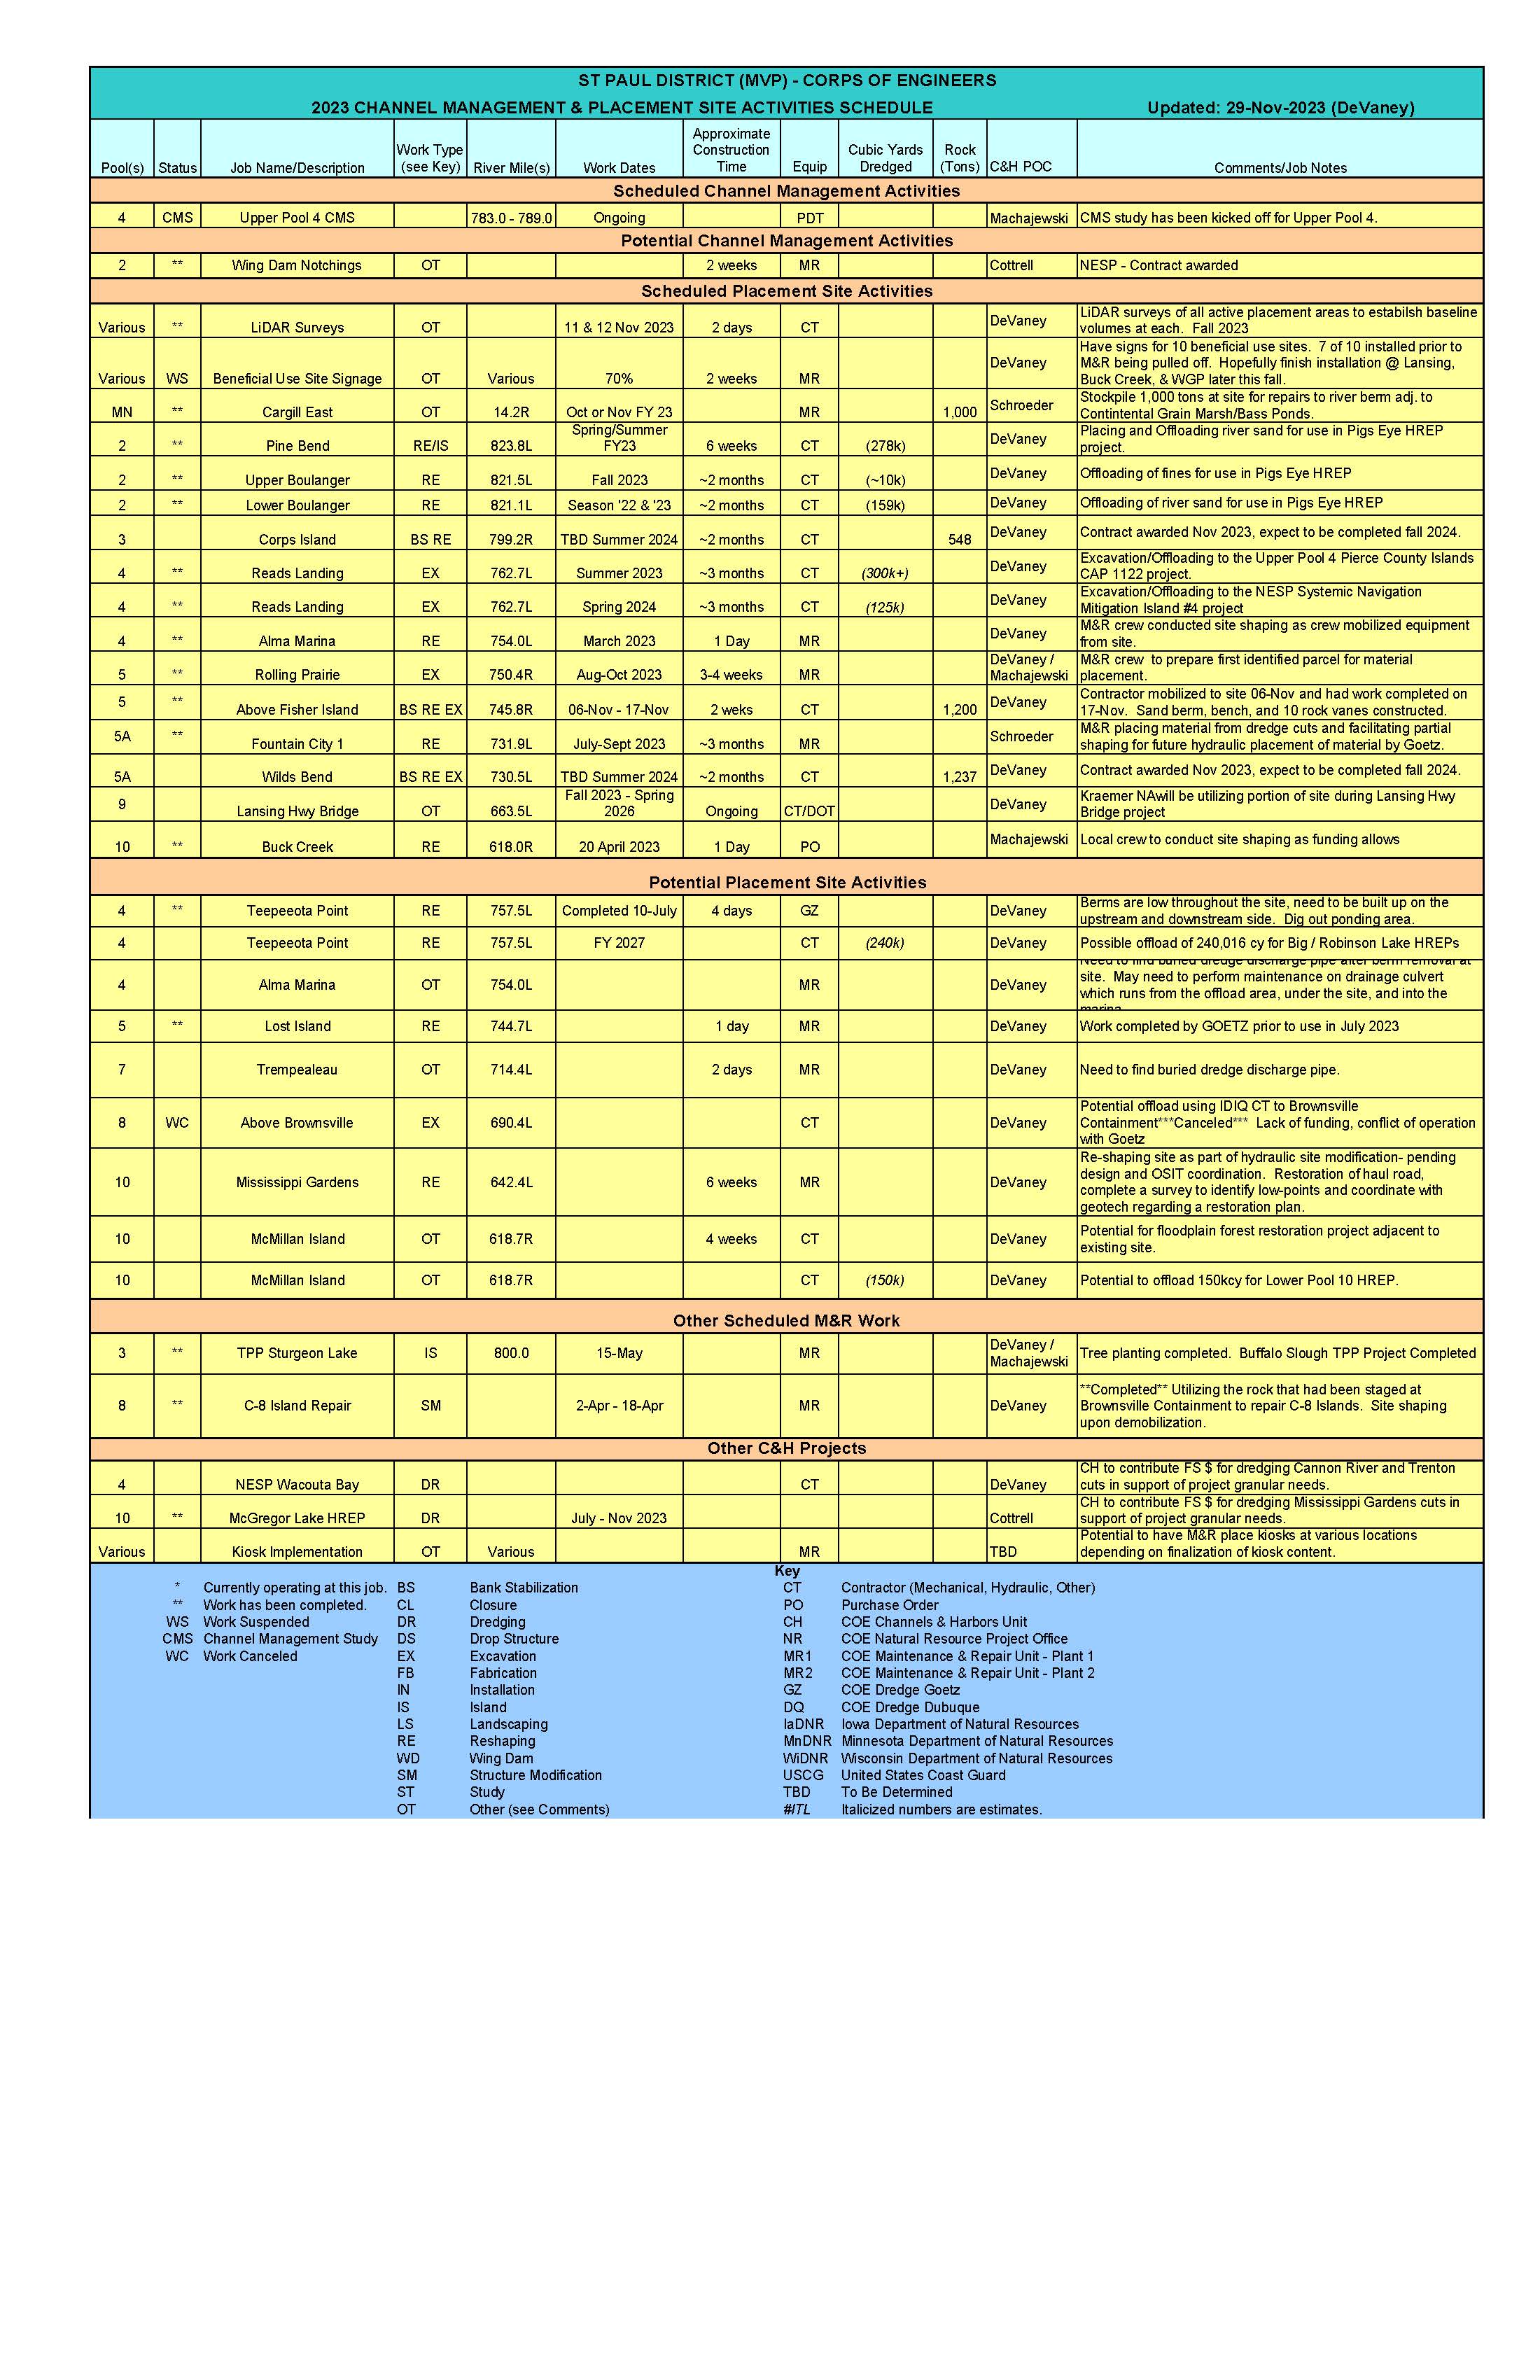 Channel Management and Placement Site Activities Schedule